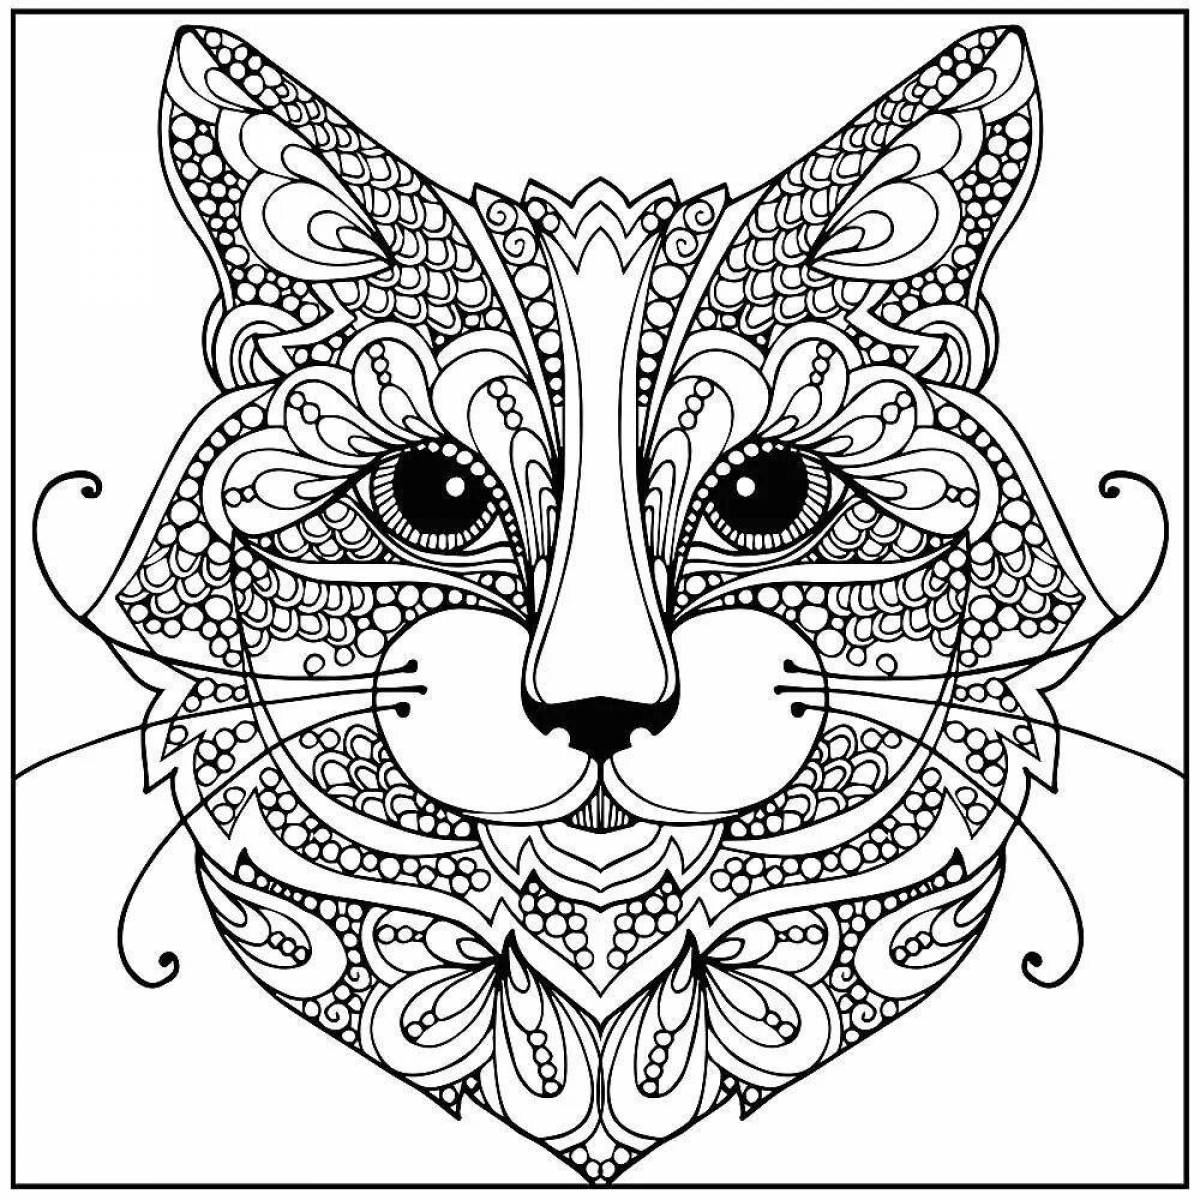 A wonderful coloring book for girls 12 years old complex of animals